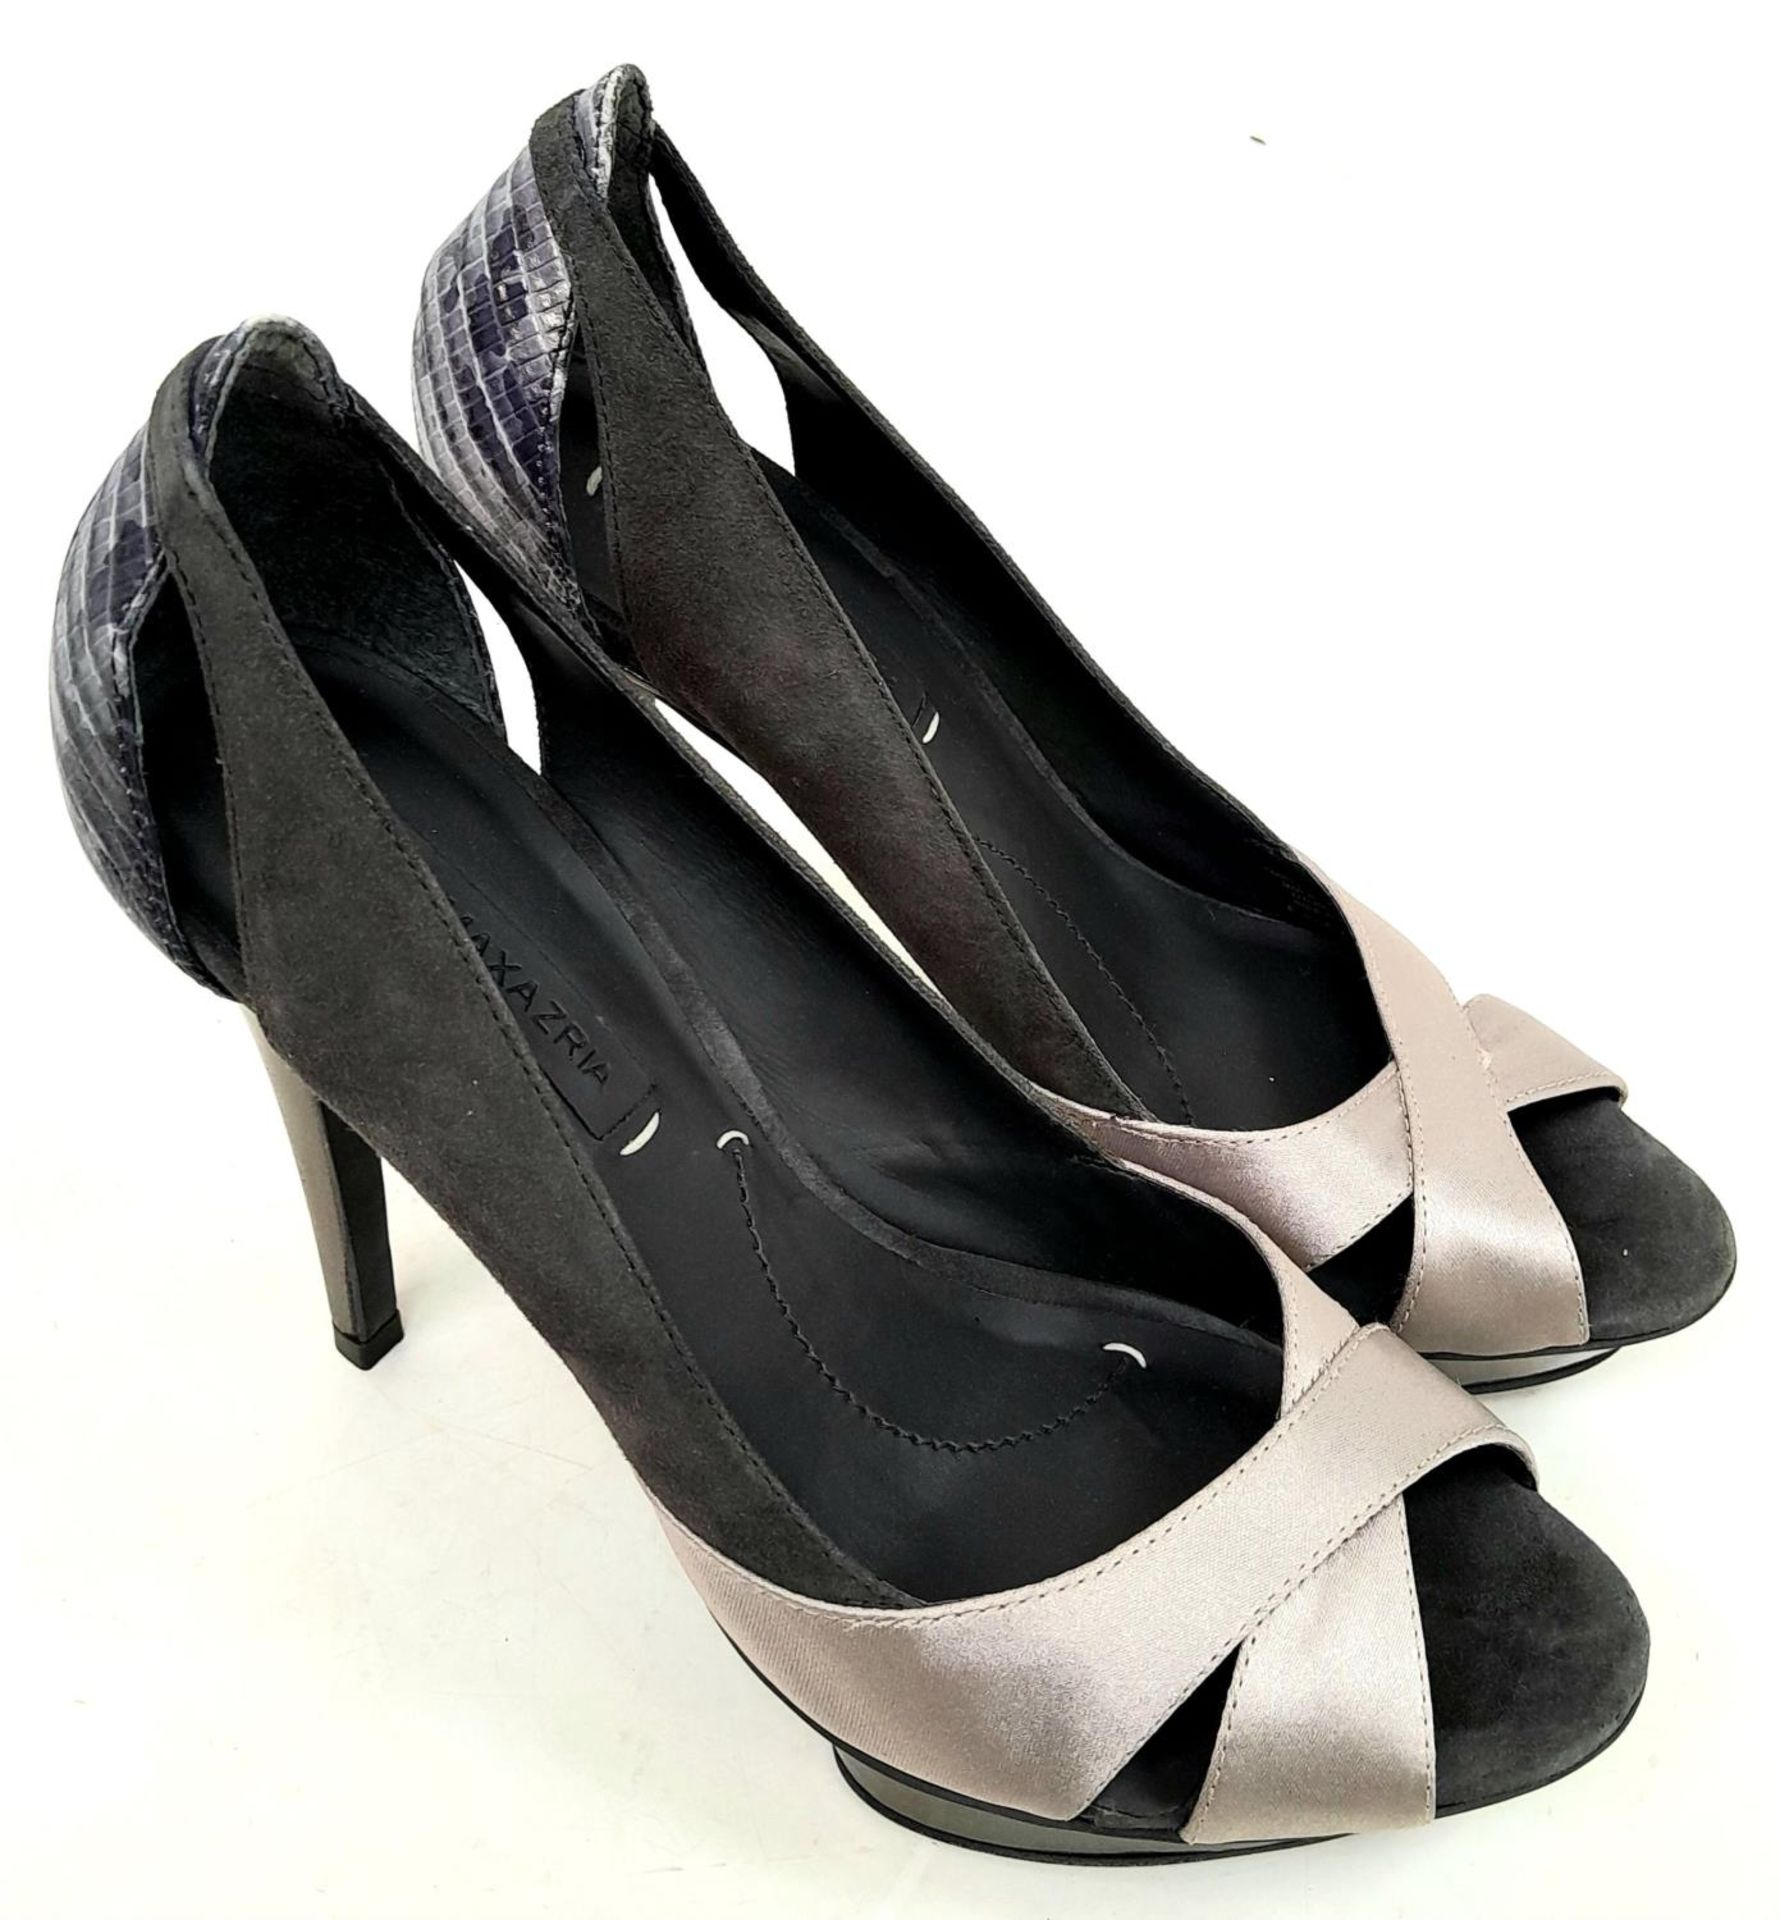 A pair of lightly used high heel (4") ladies shoes by Max Mara